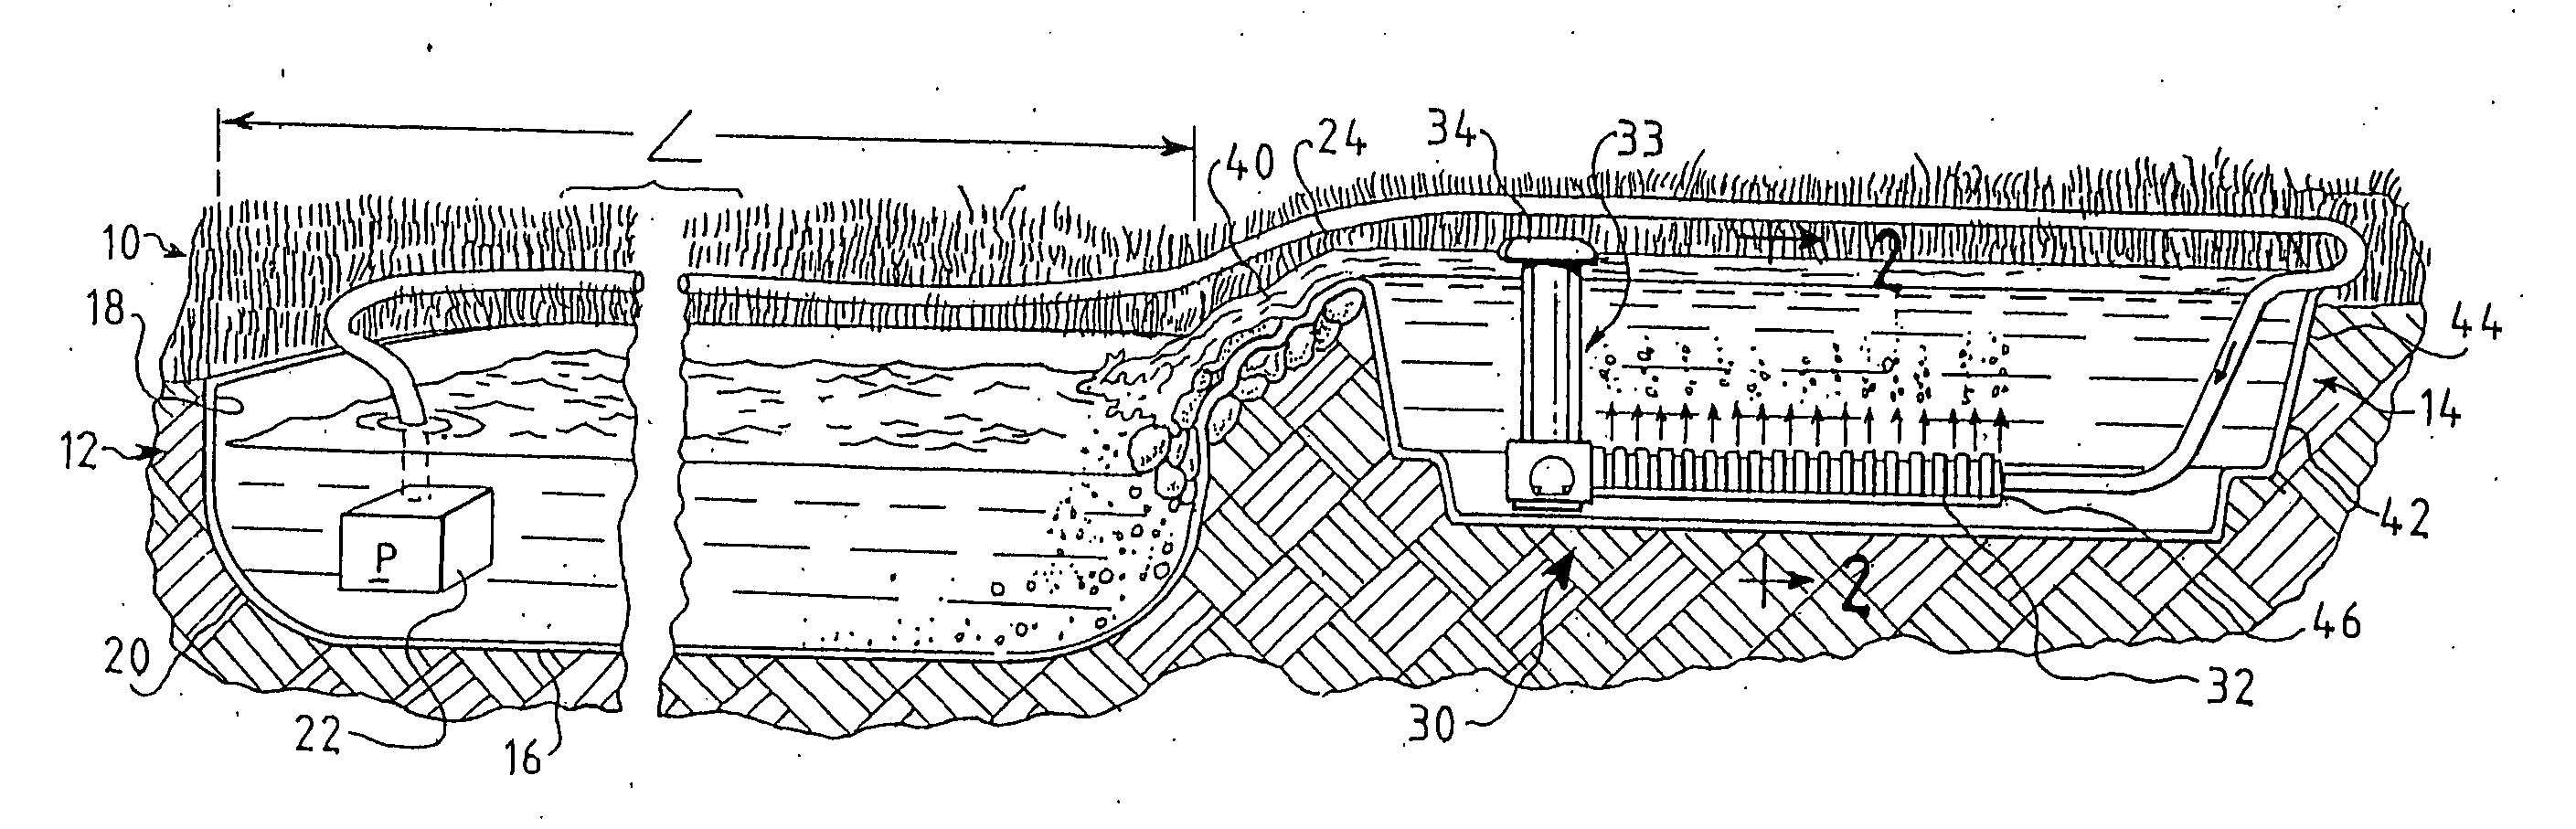 Constructed wetlands system, treatment apparatus and method